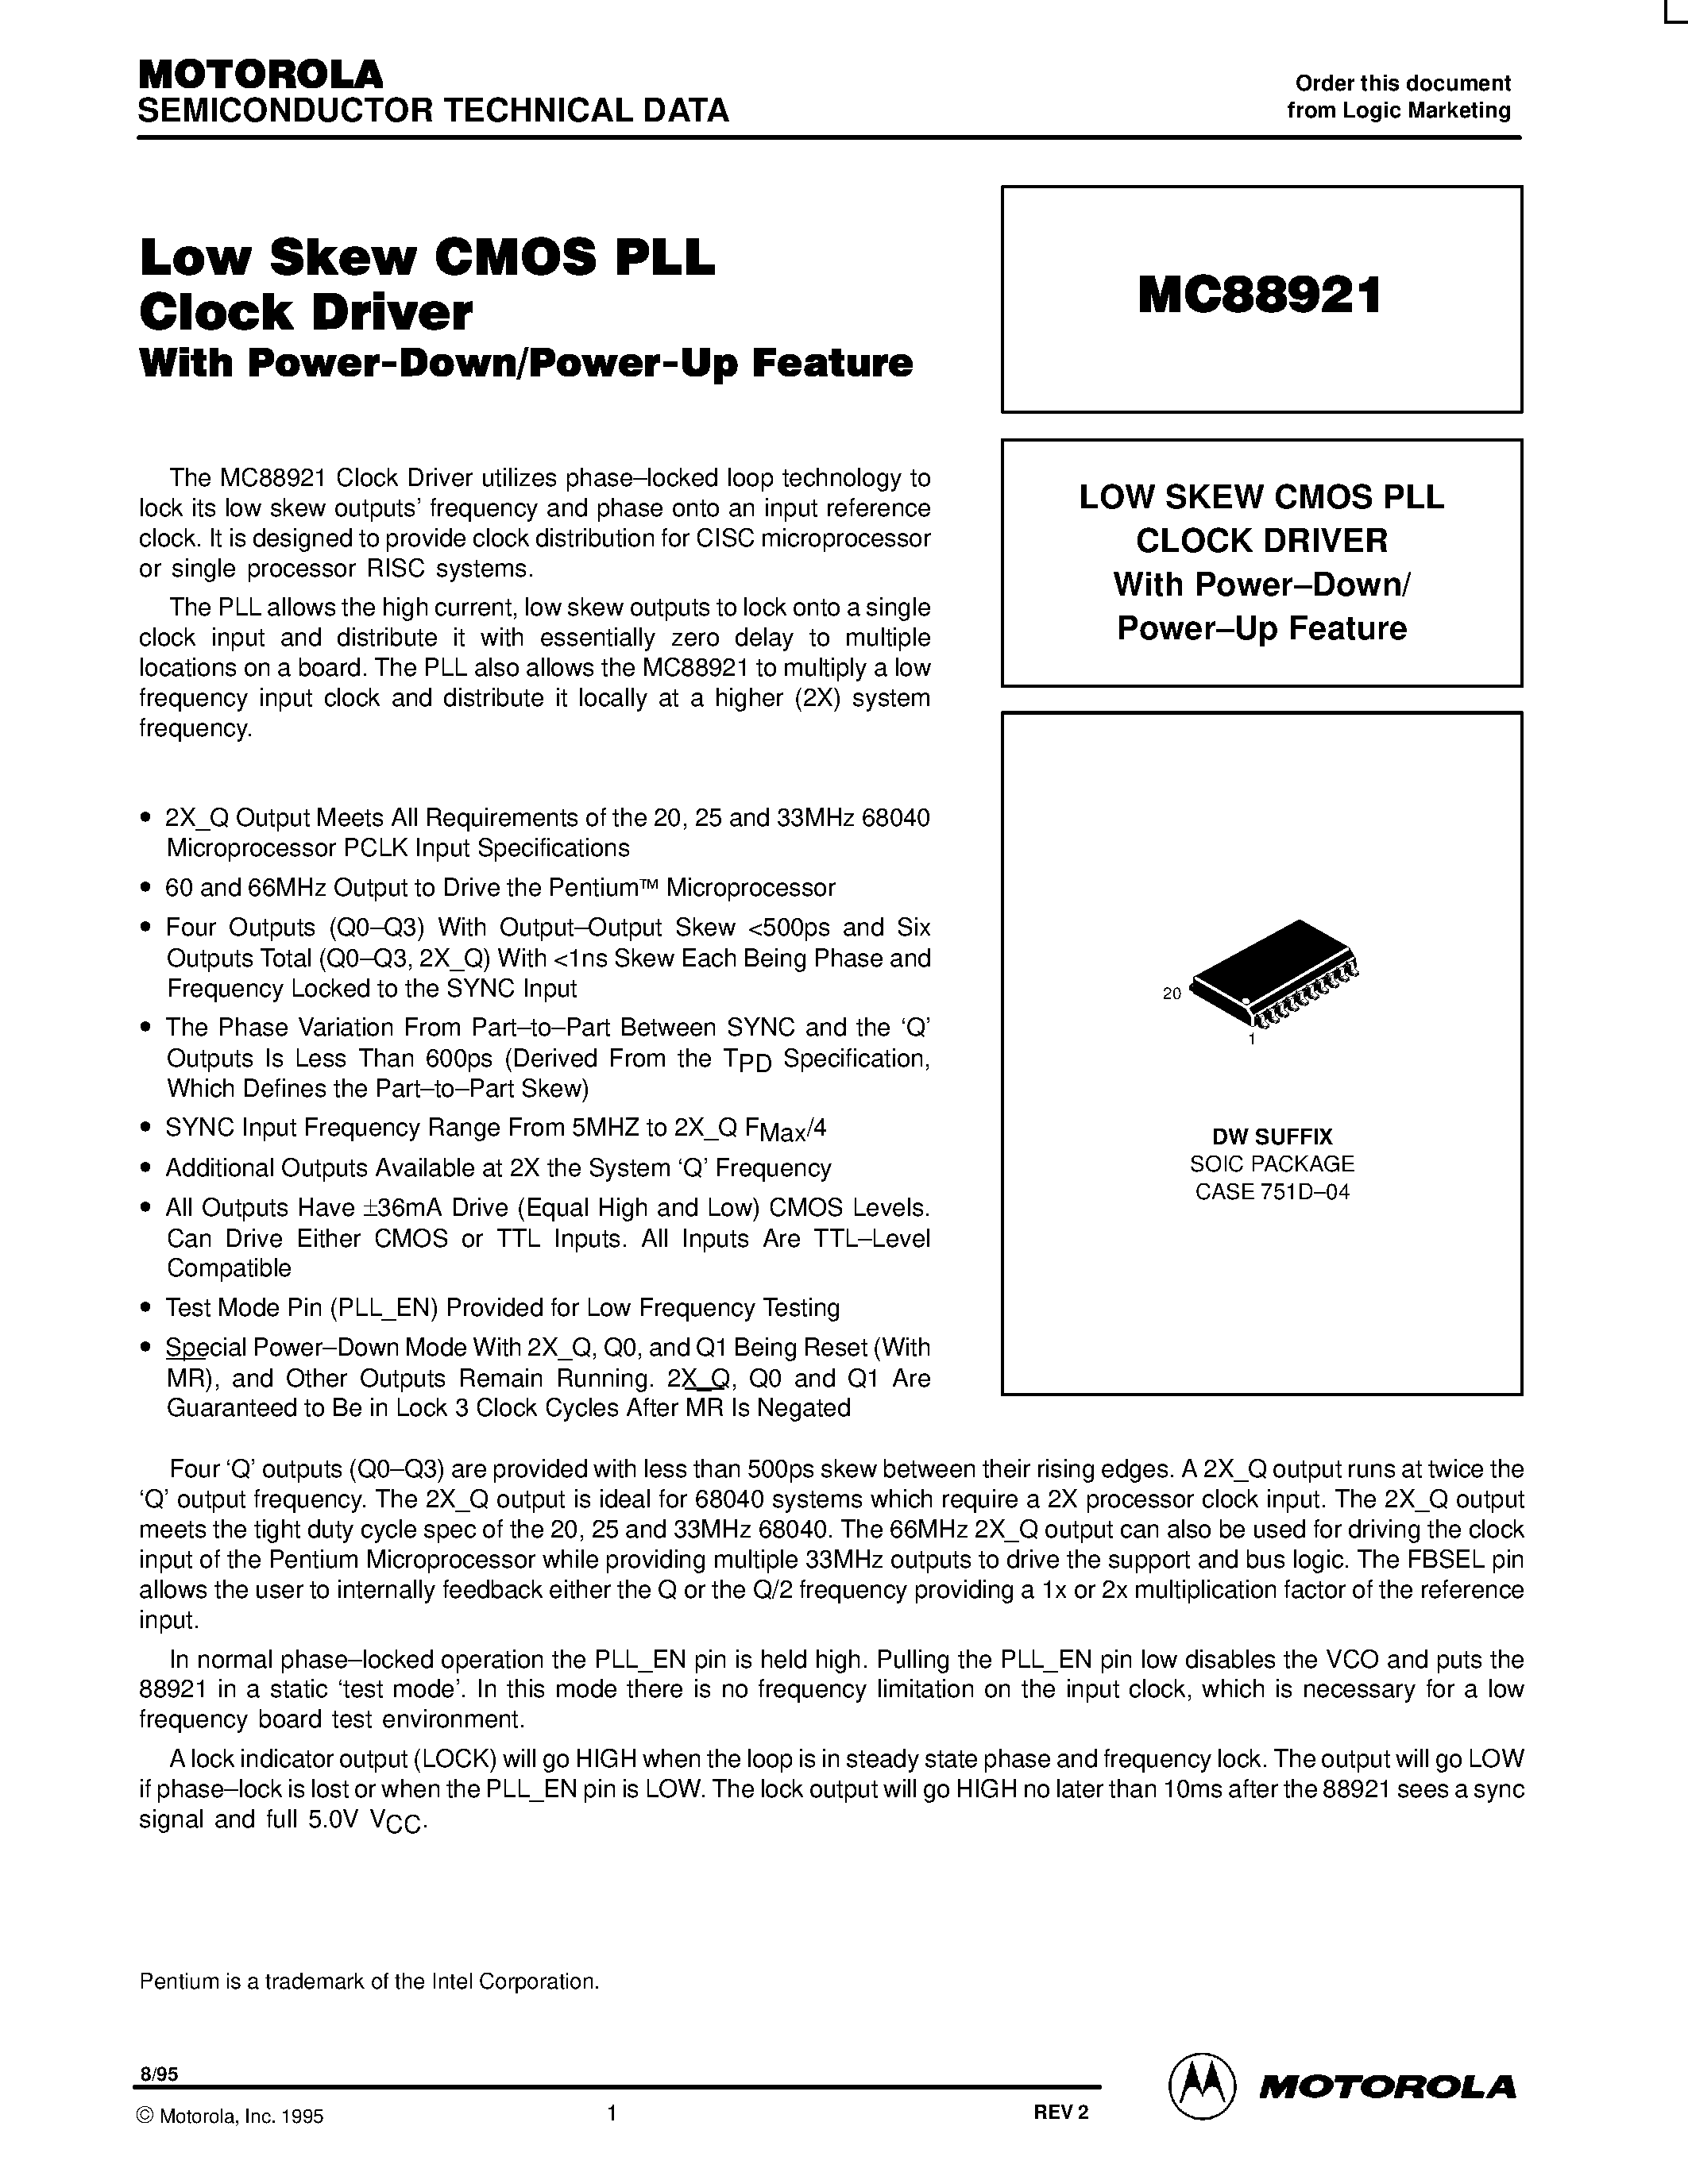 Даташит MC88921 - LOW SKEW CMOS PLL CLOCK DRIVER With Power-Down/ Power-Up Feature страница 1